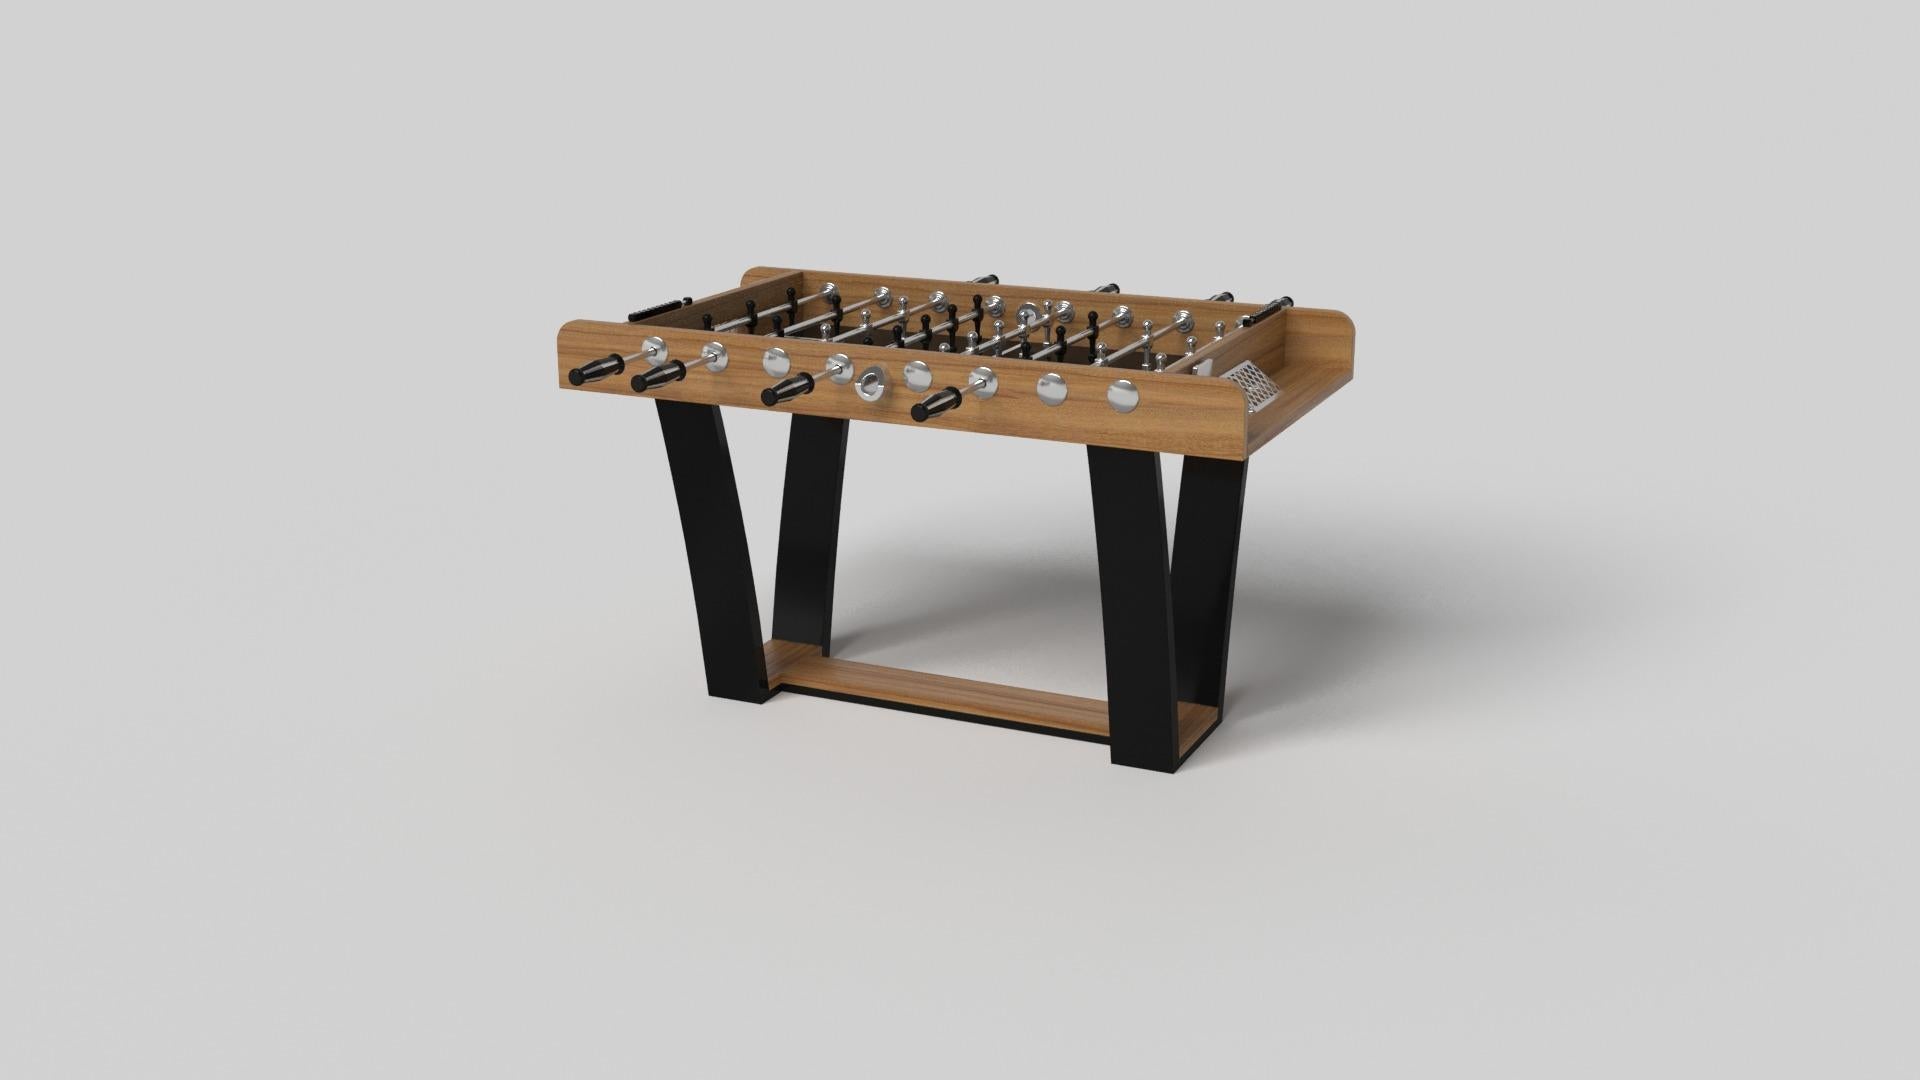 With an I-shaped metal base, slightly sloped metal legs, and a contrasting wood top, the Elite foosball table exudes modern sophistication while evoking a sense of art deco design. This table is a confluence of style, made to meet today's demands